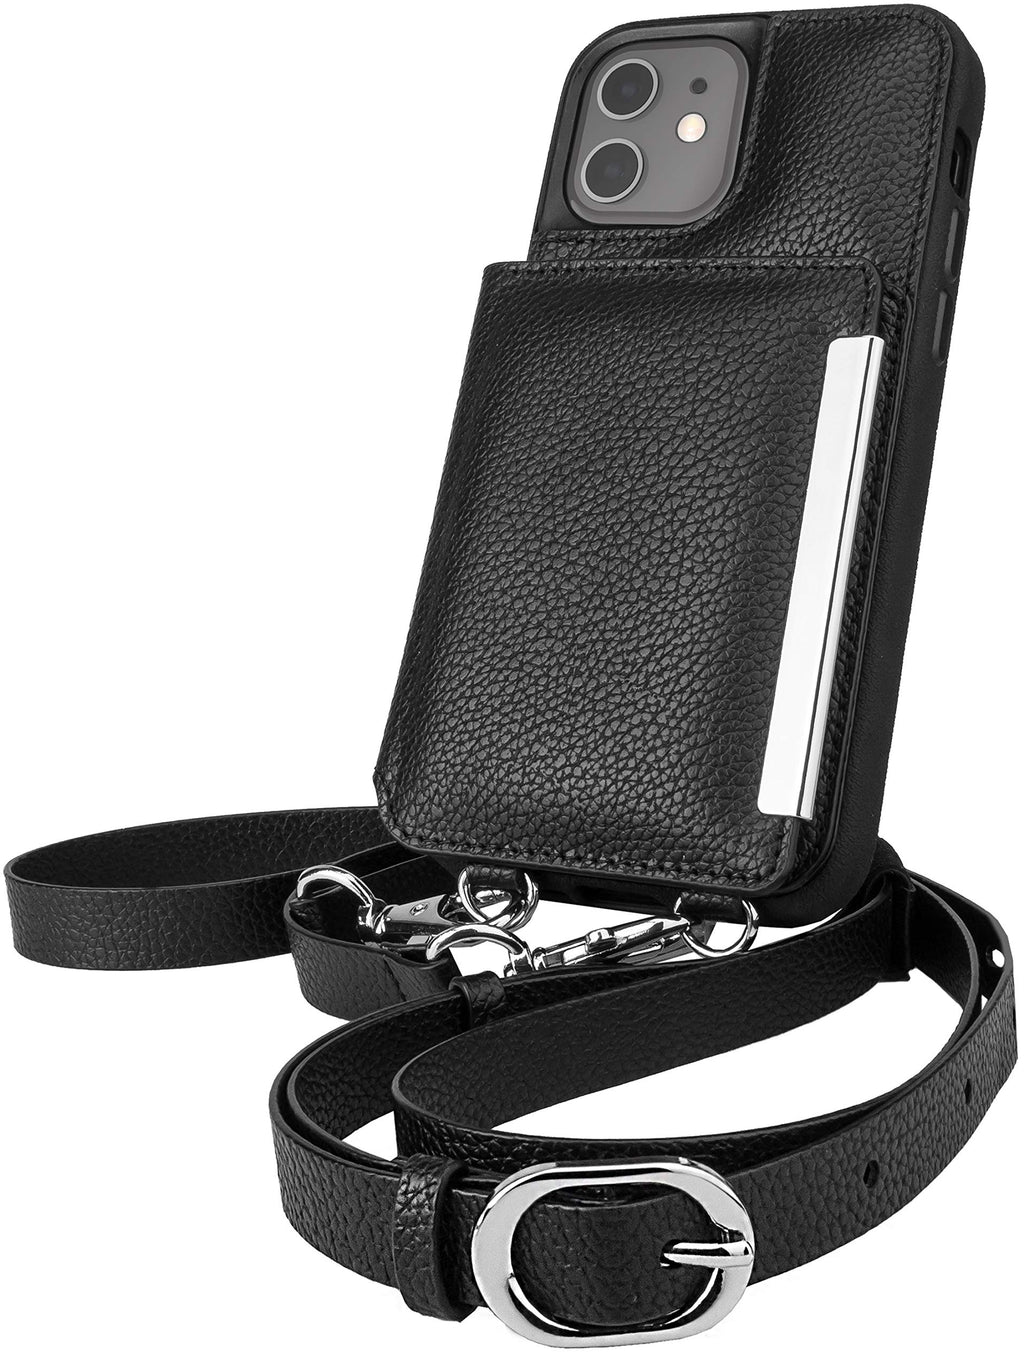 Smartish iPhone 12/12 Pro Crossbody Case for Women - Dancing Queen [Purse/Clutch with Detachable Strap & Card Holder] - Stiletto Black-Silver iPhone 12 / 12 Pro